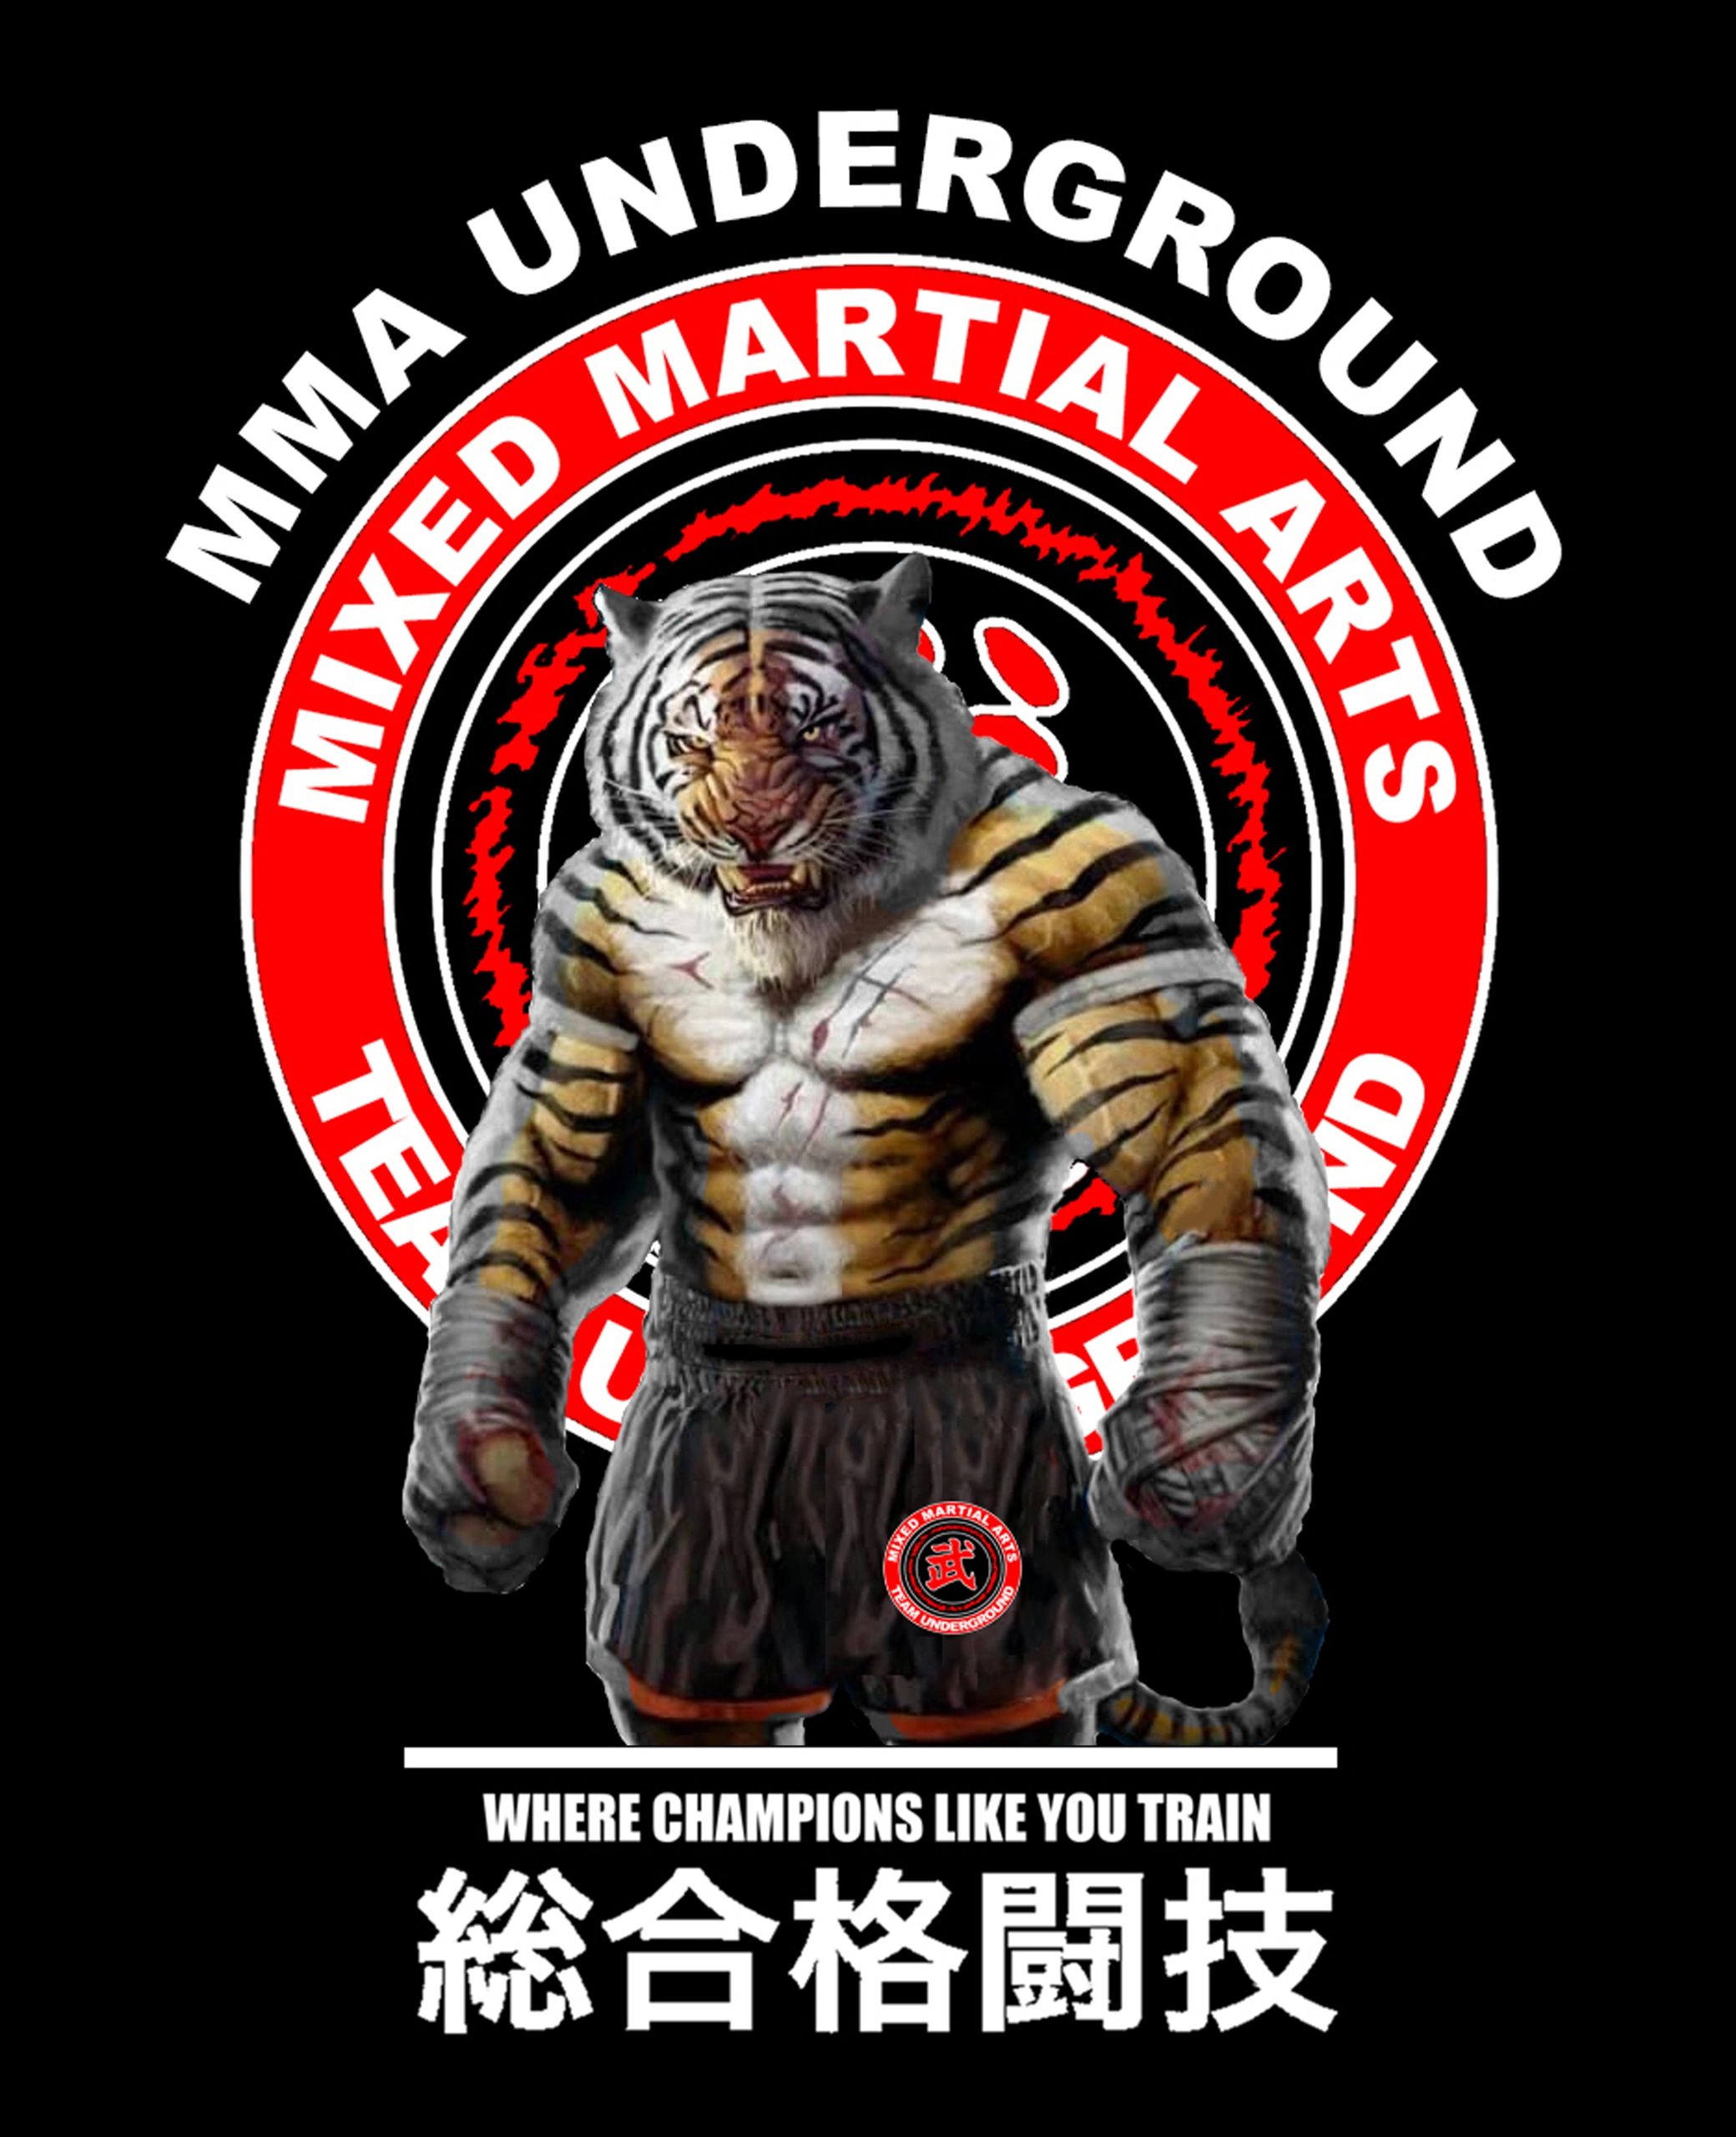  MMA UNDERGROUND LOGO WITH A TIGER AND  THE LEGEND WHERE CHAMPIONS LIKE YOU TRAIN